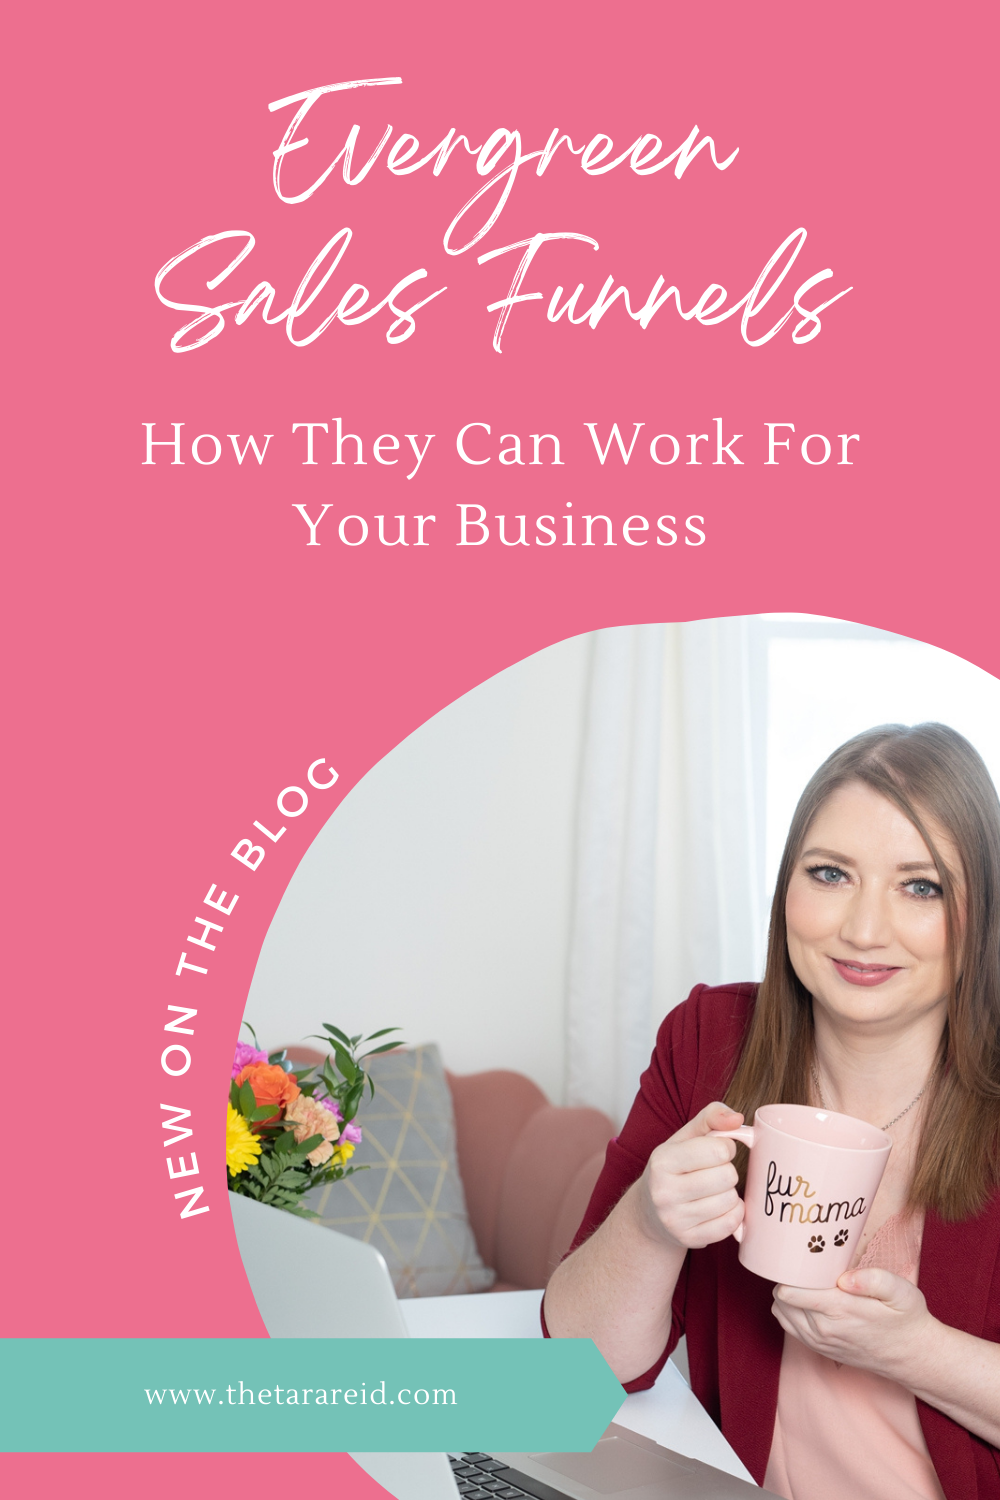 Evergreen Sales Funnels - How They Can Work For Your Business